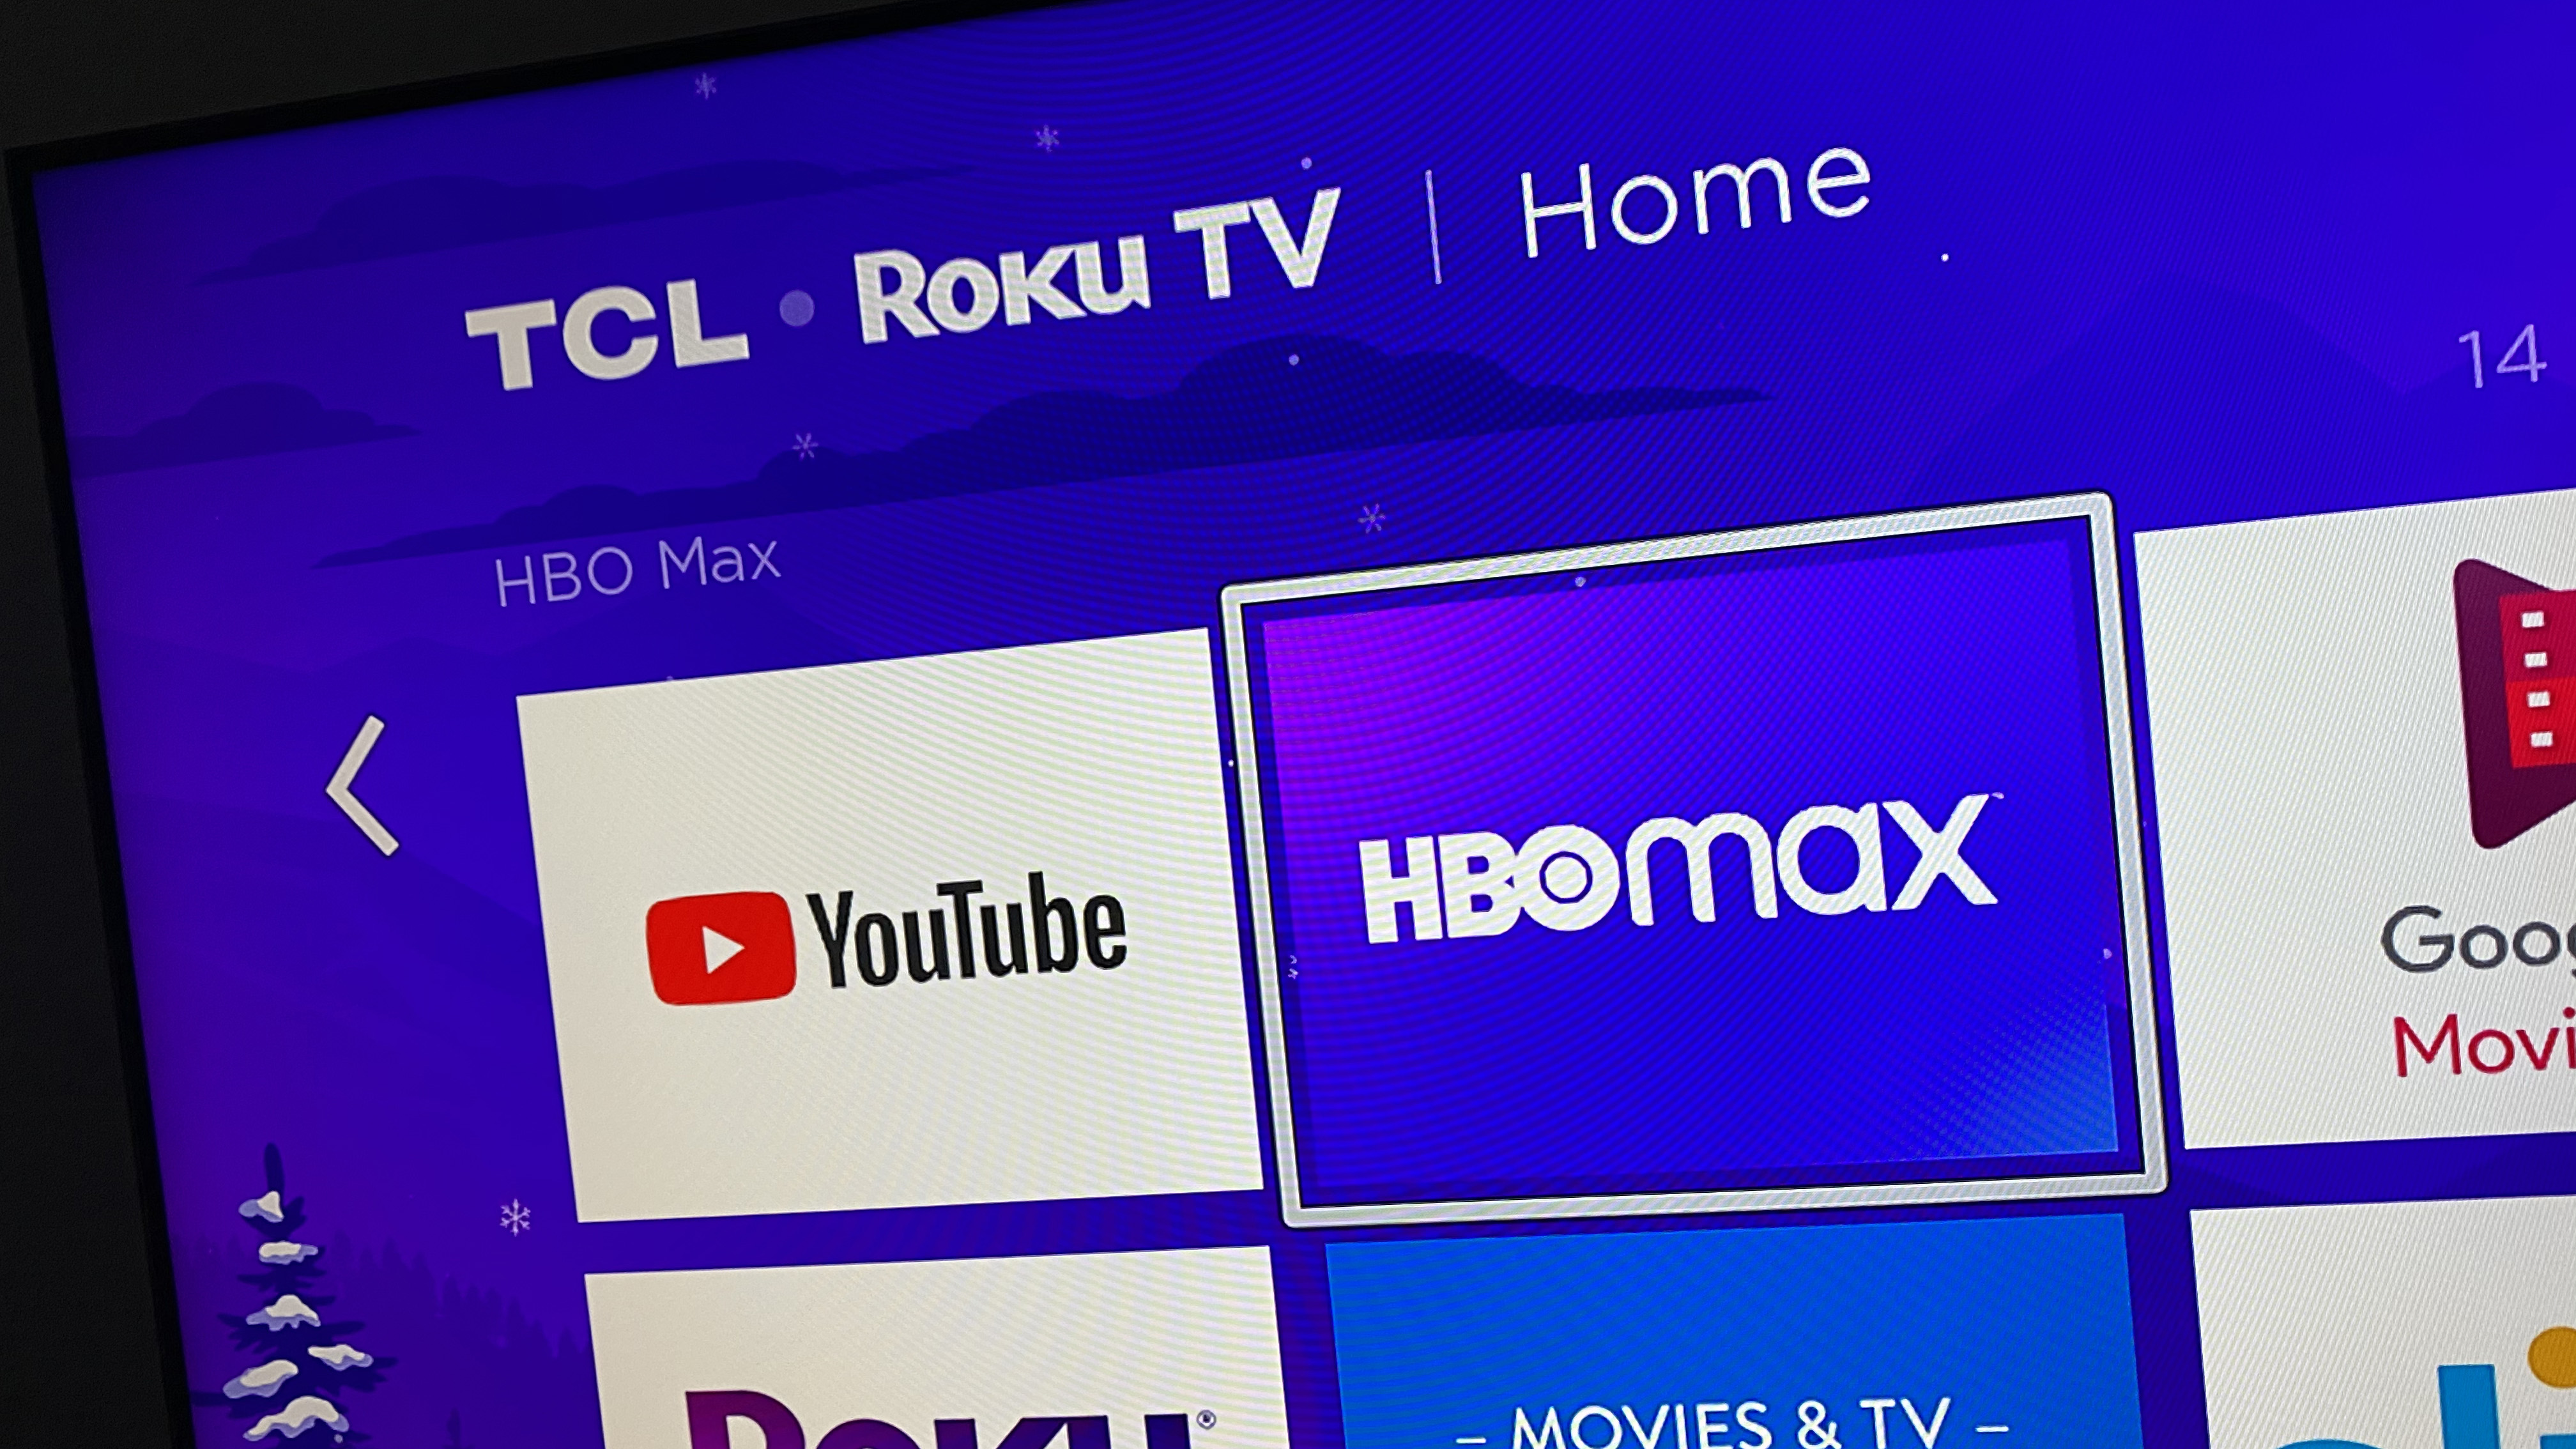 HBO Max is a stand-alone streaming platform that bundles all of HBO together with even more TV favorites, blockbuster movies, and new Max Originals for everyone in the family